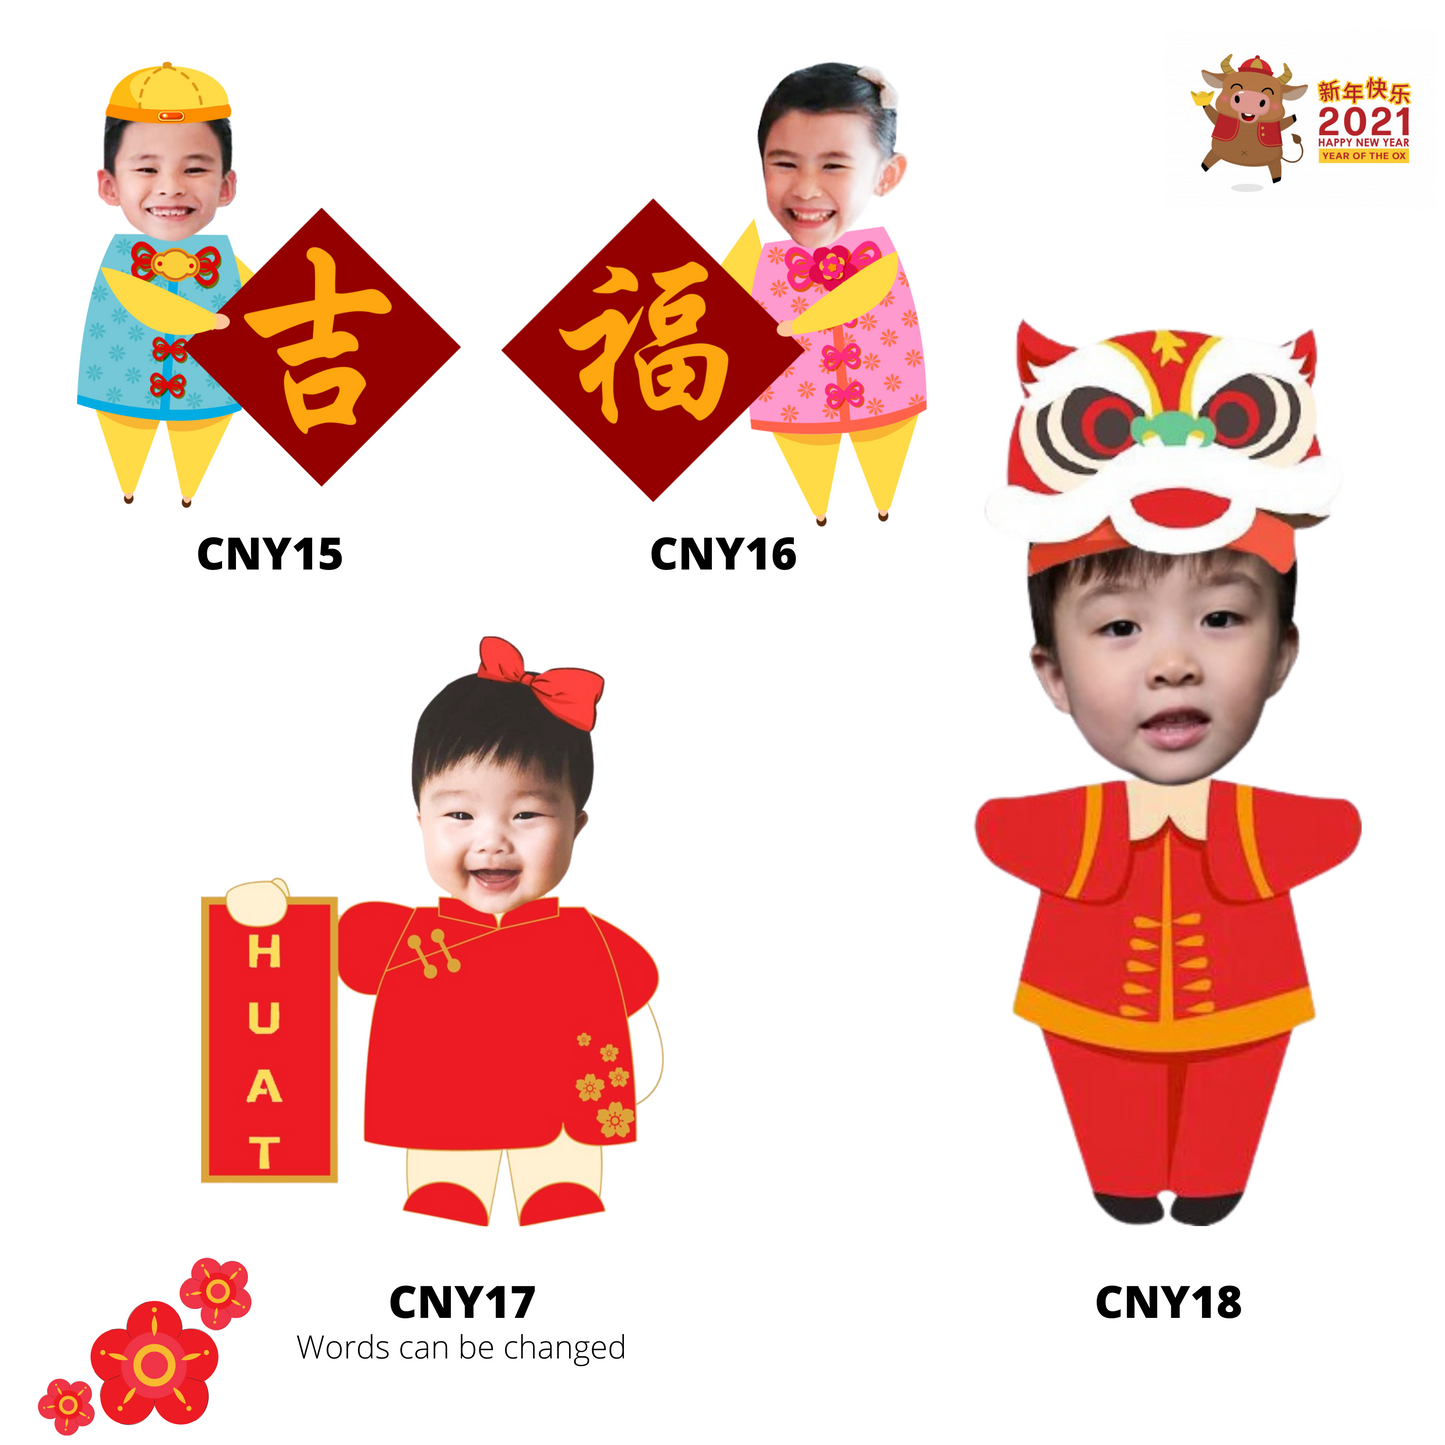 Personalized Chinese New Year Design Keychain Magnet Ornaments Customized